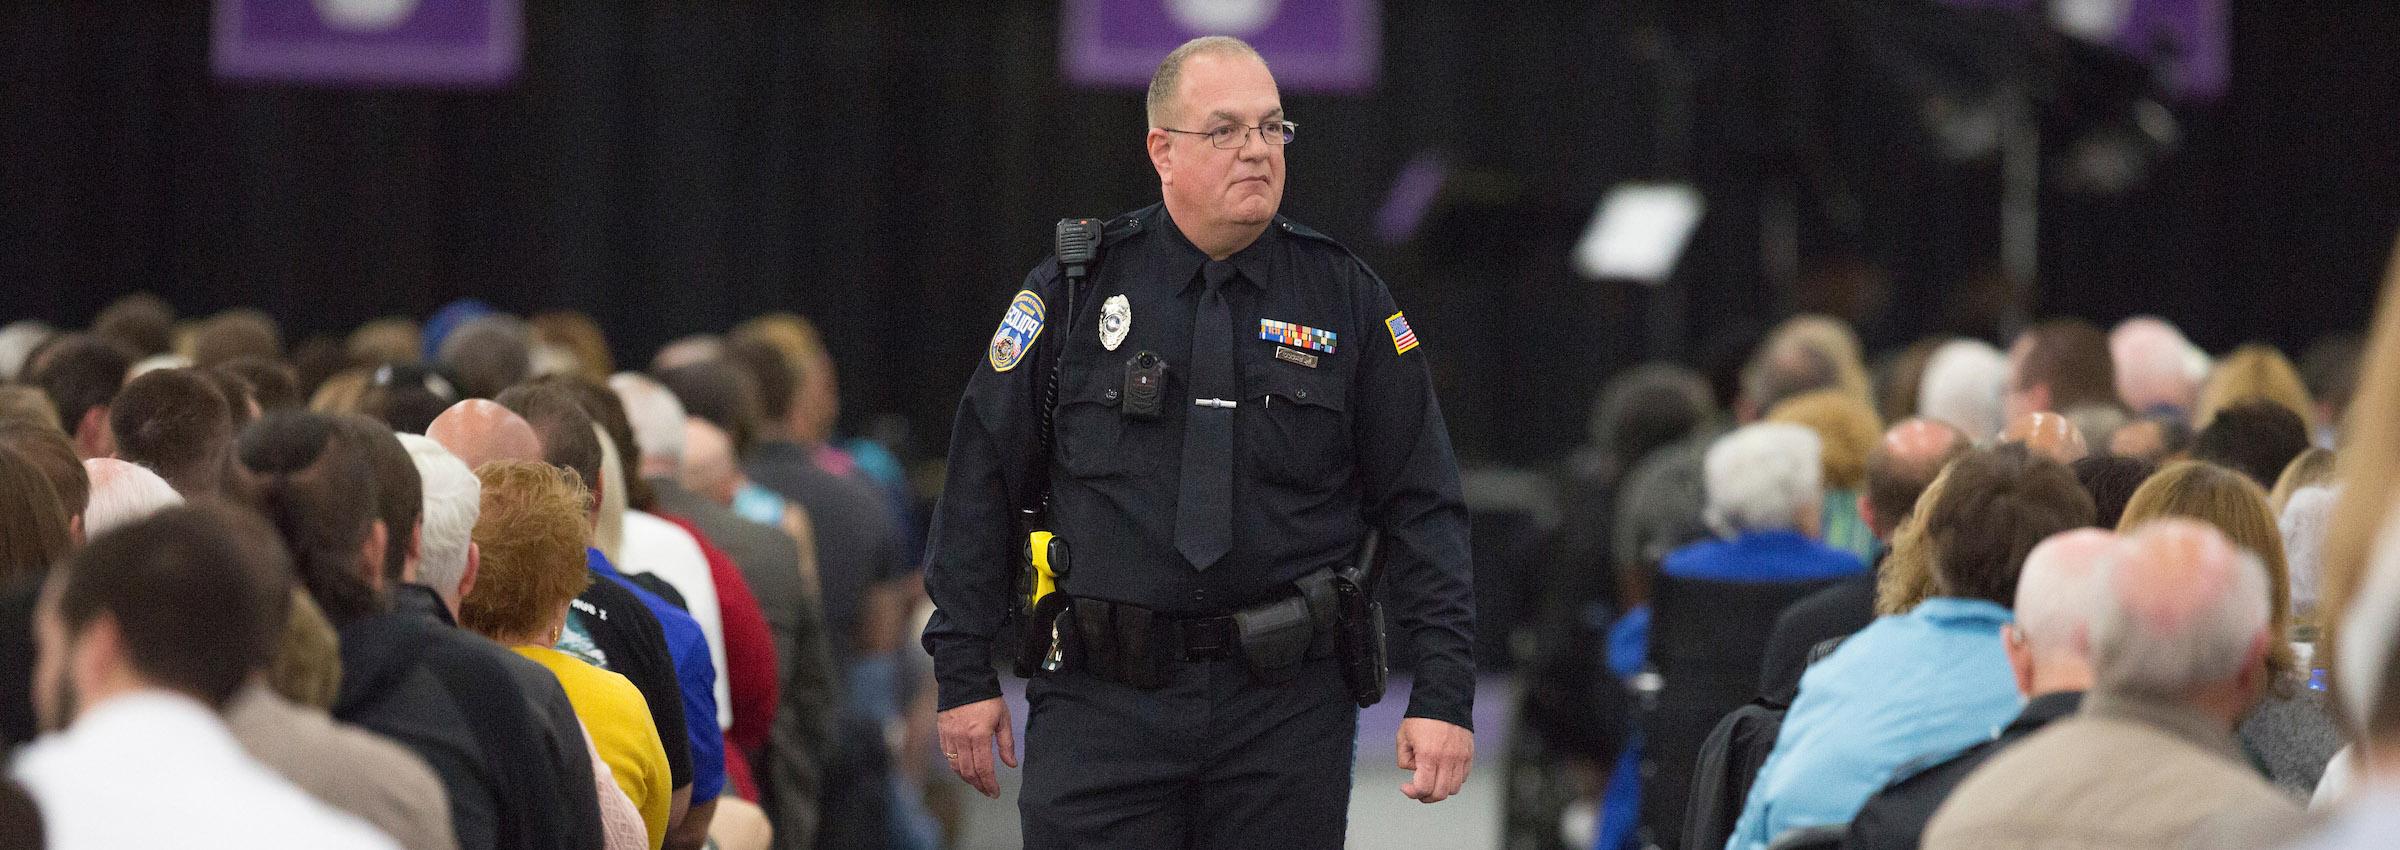 Police officer from UW-Whtiewater at commencement